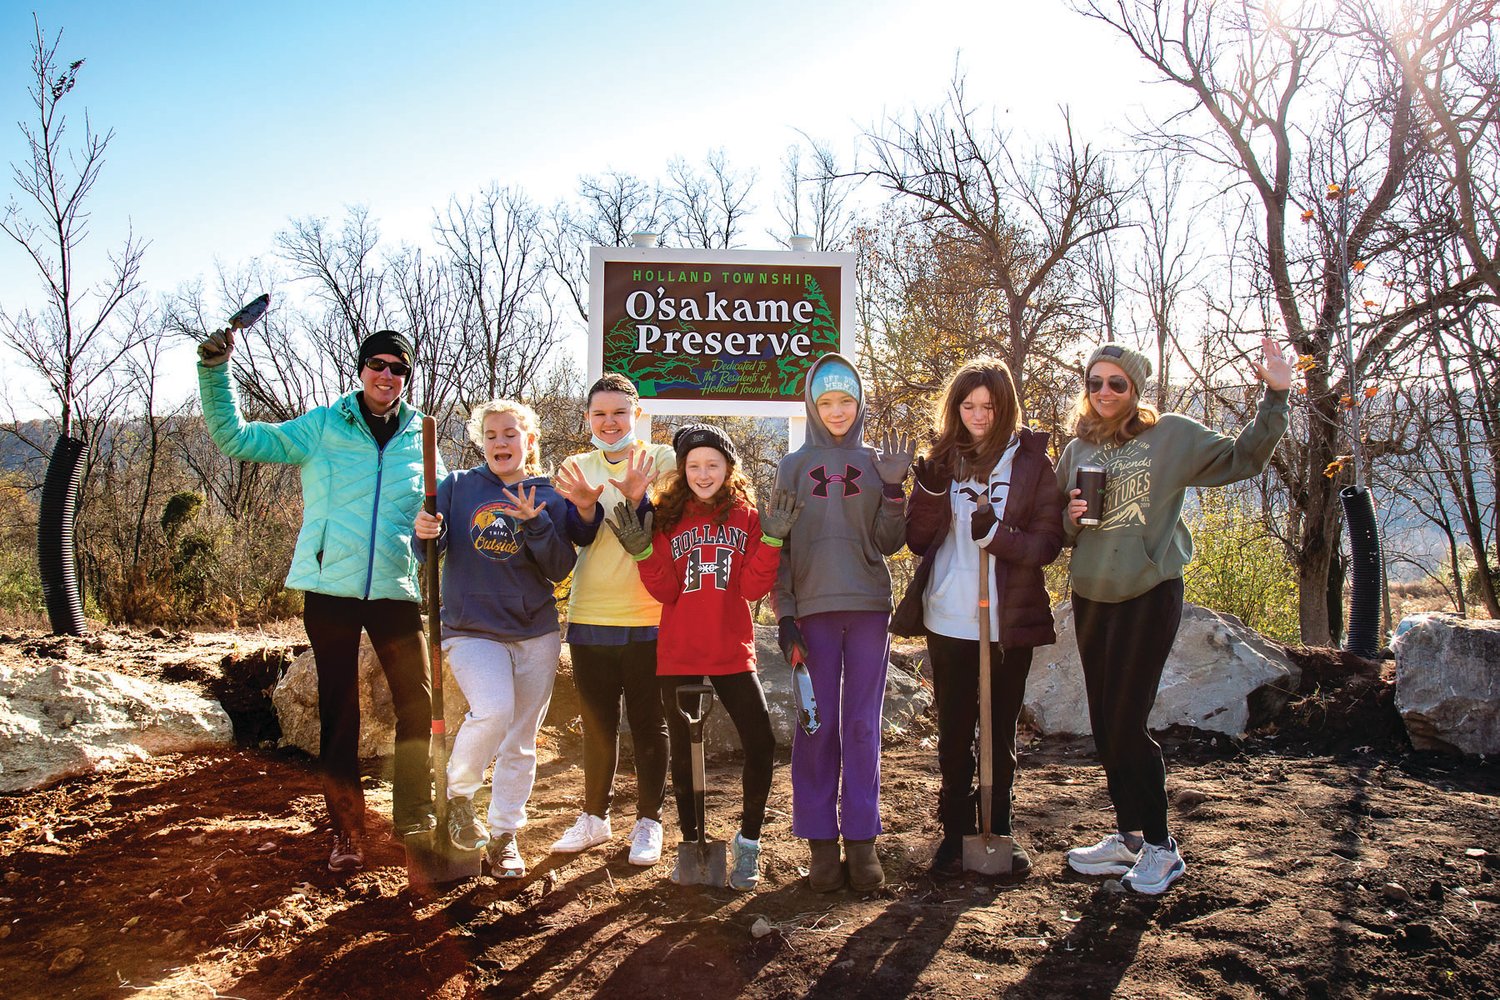 Holland Township Girl Scouts took a special interest in the township’s new park, naming it and planting some flowering bulbs at the entrance.